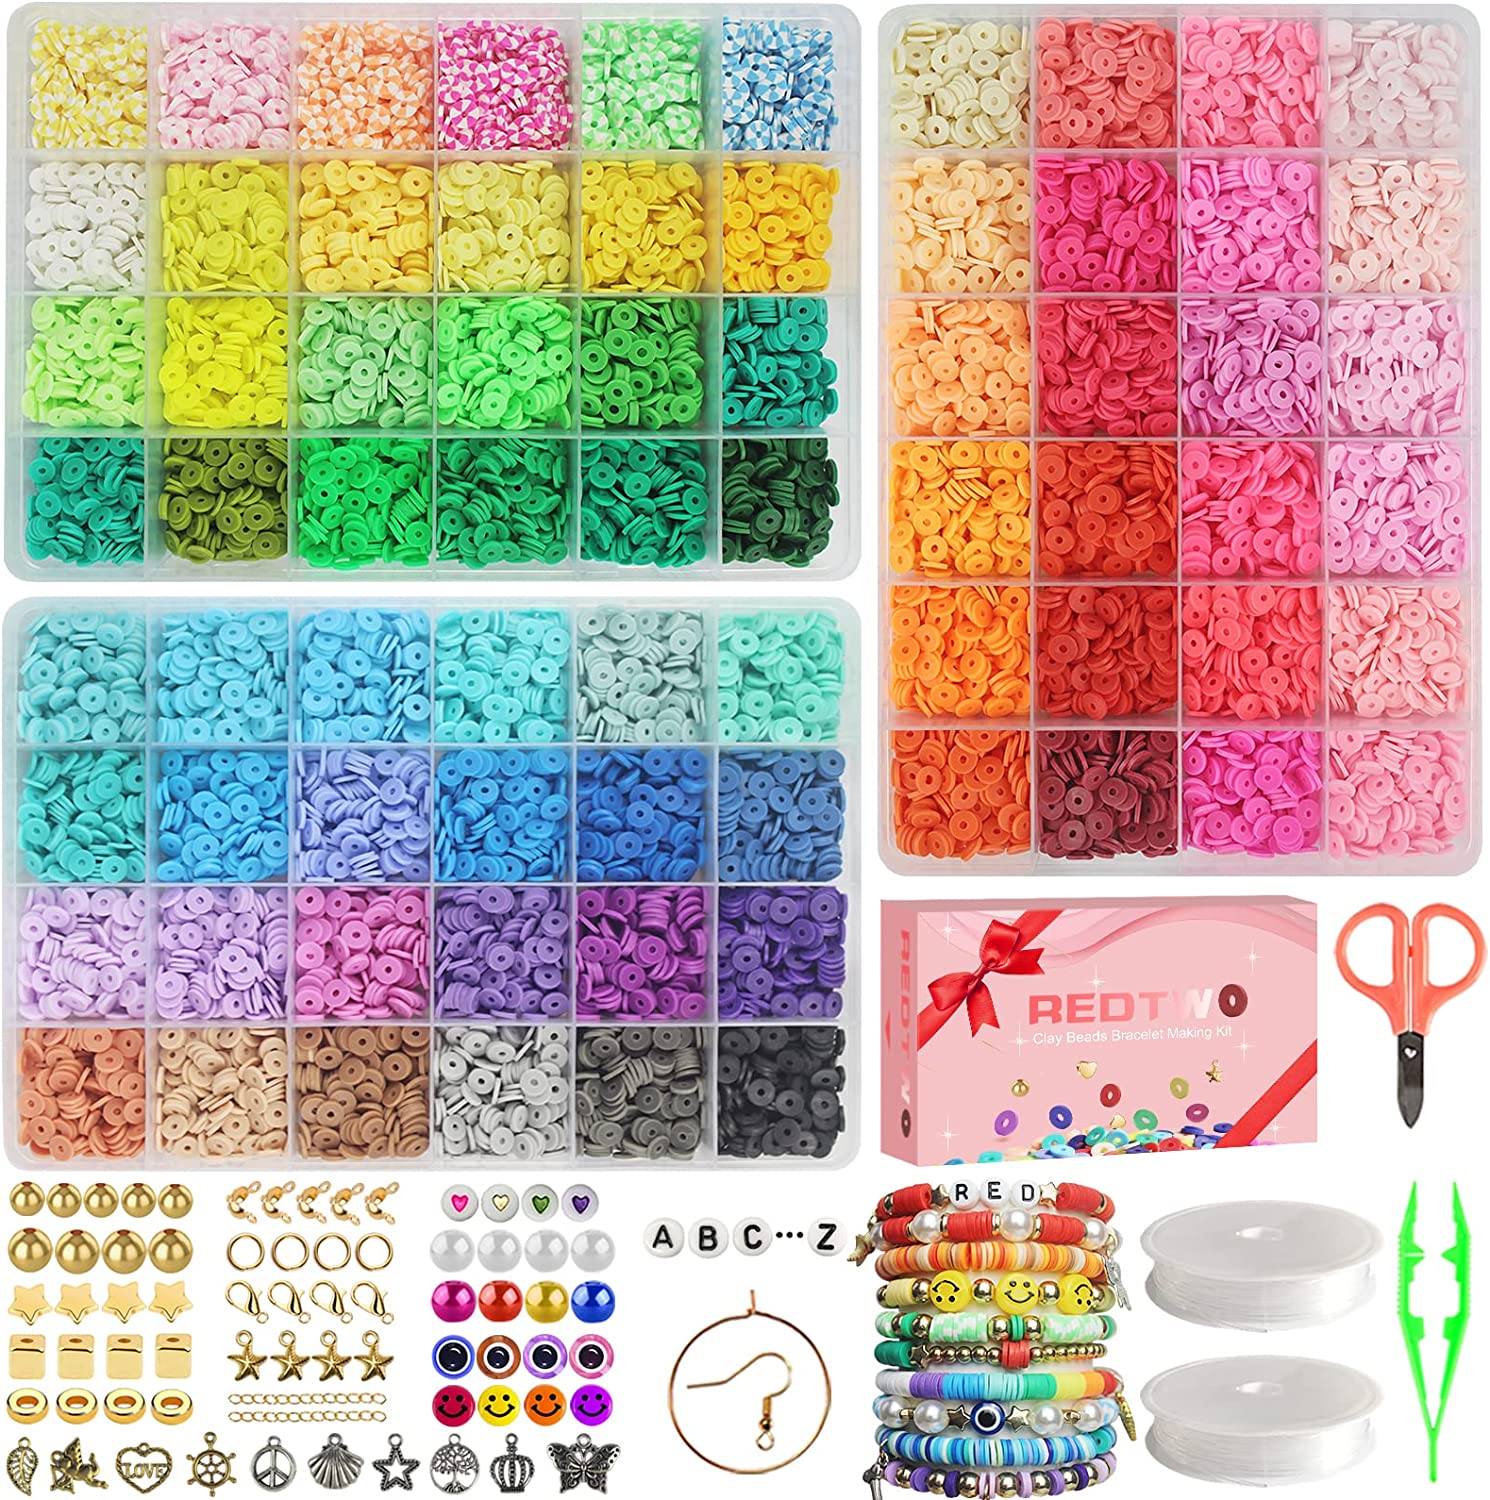  Redtwo 1400 Pcs Letter Beads for Friendship Bracelets Making  Kit, A-Z Alphabet Beads, Colorful Heart Beads & Number Beads for DIY  Jewelry Making : Arts, Crafts & Sewing